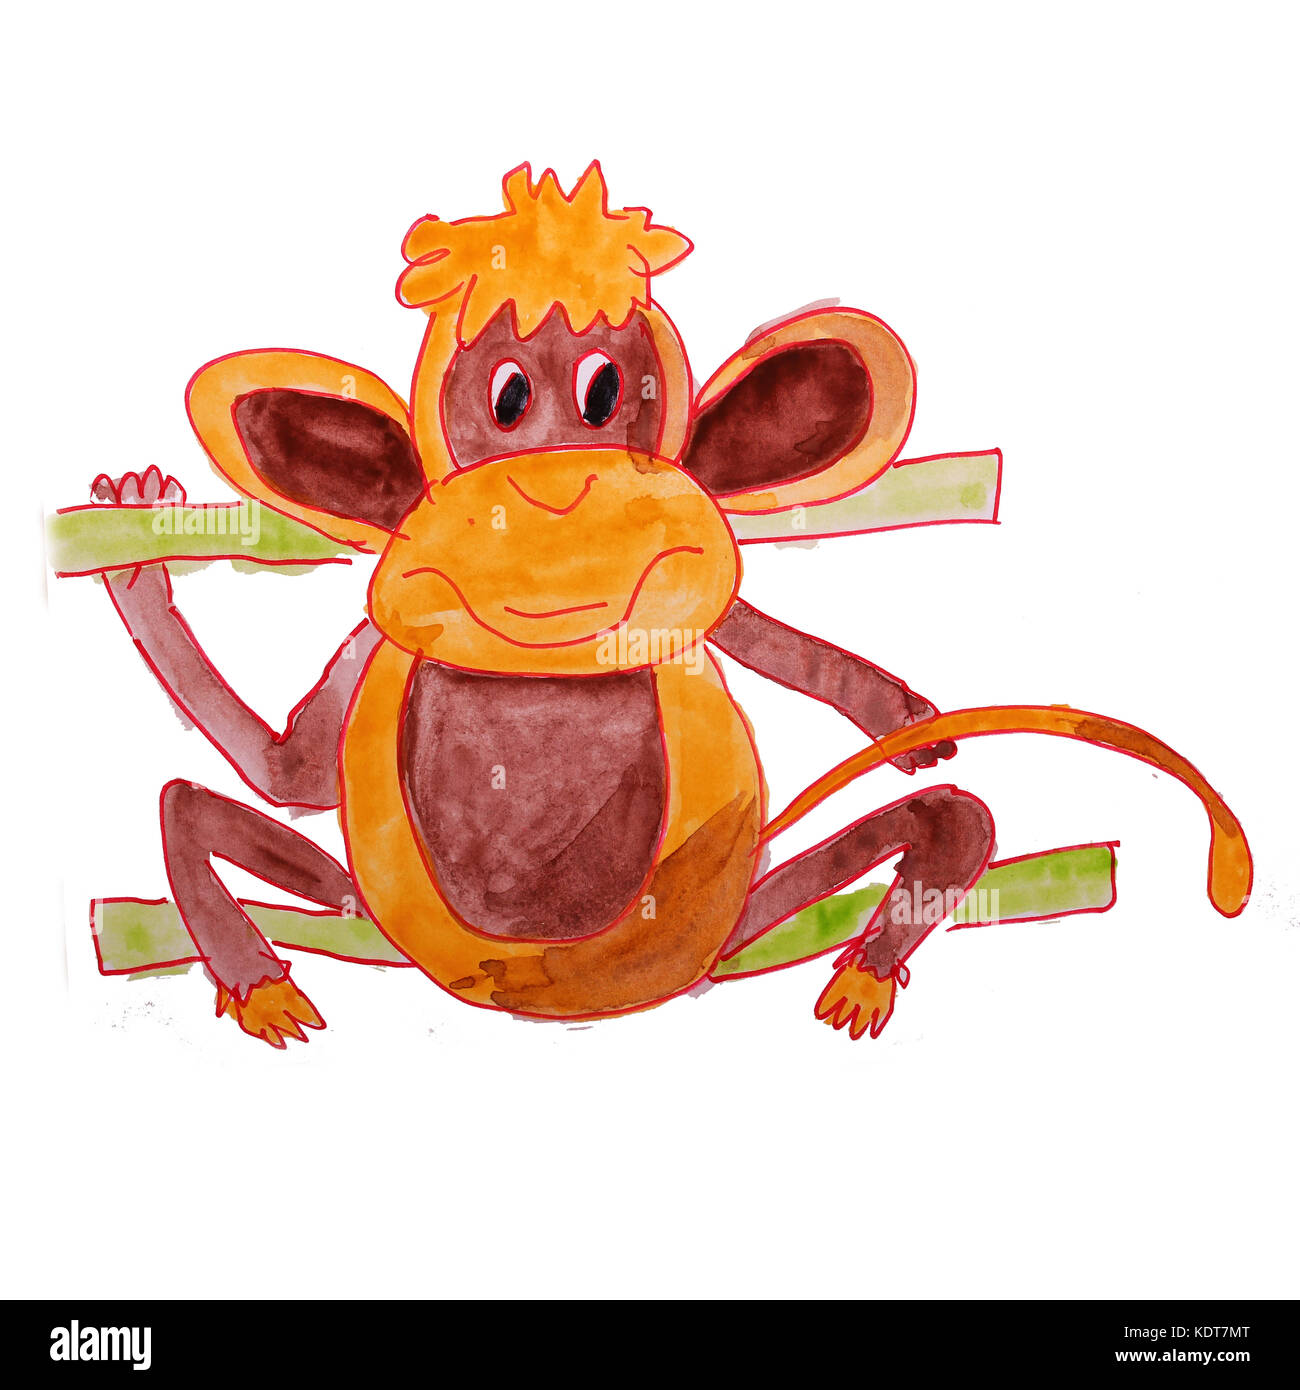 monkey drawing watercolor isolated on white background Stock Photo